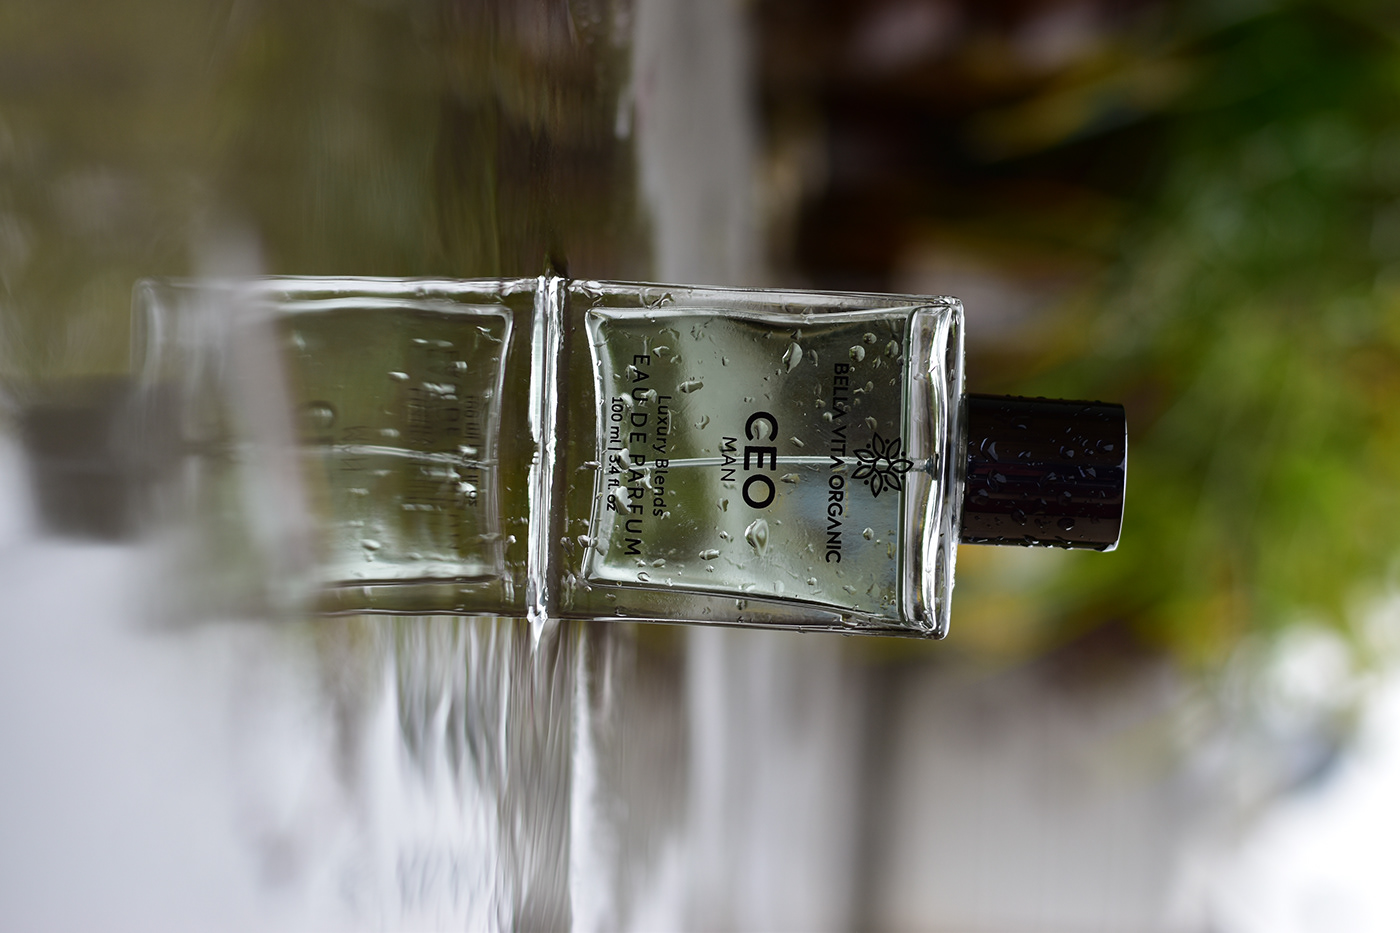 Nikon Nikon Photography Photography  photoshoot product Product Photography refelection water Water Drops weather